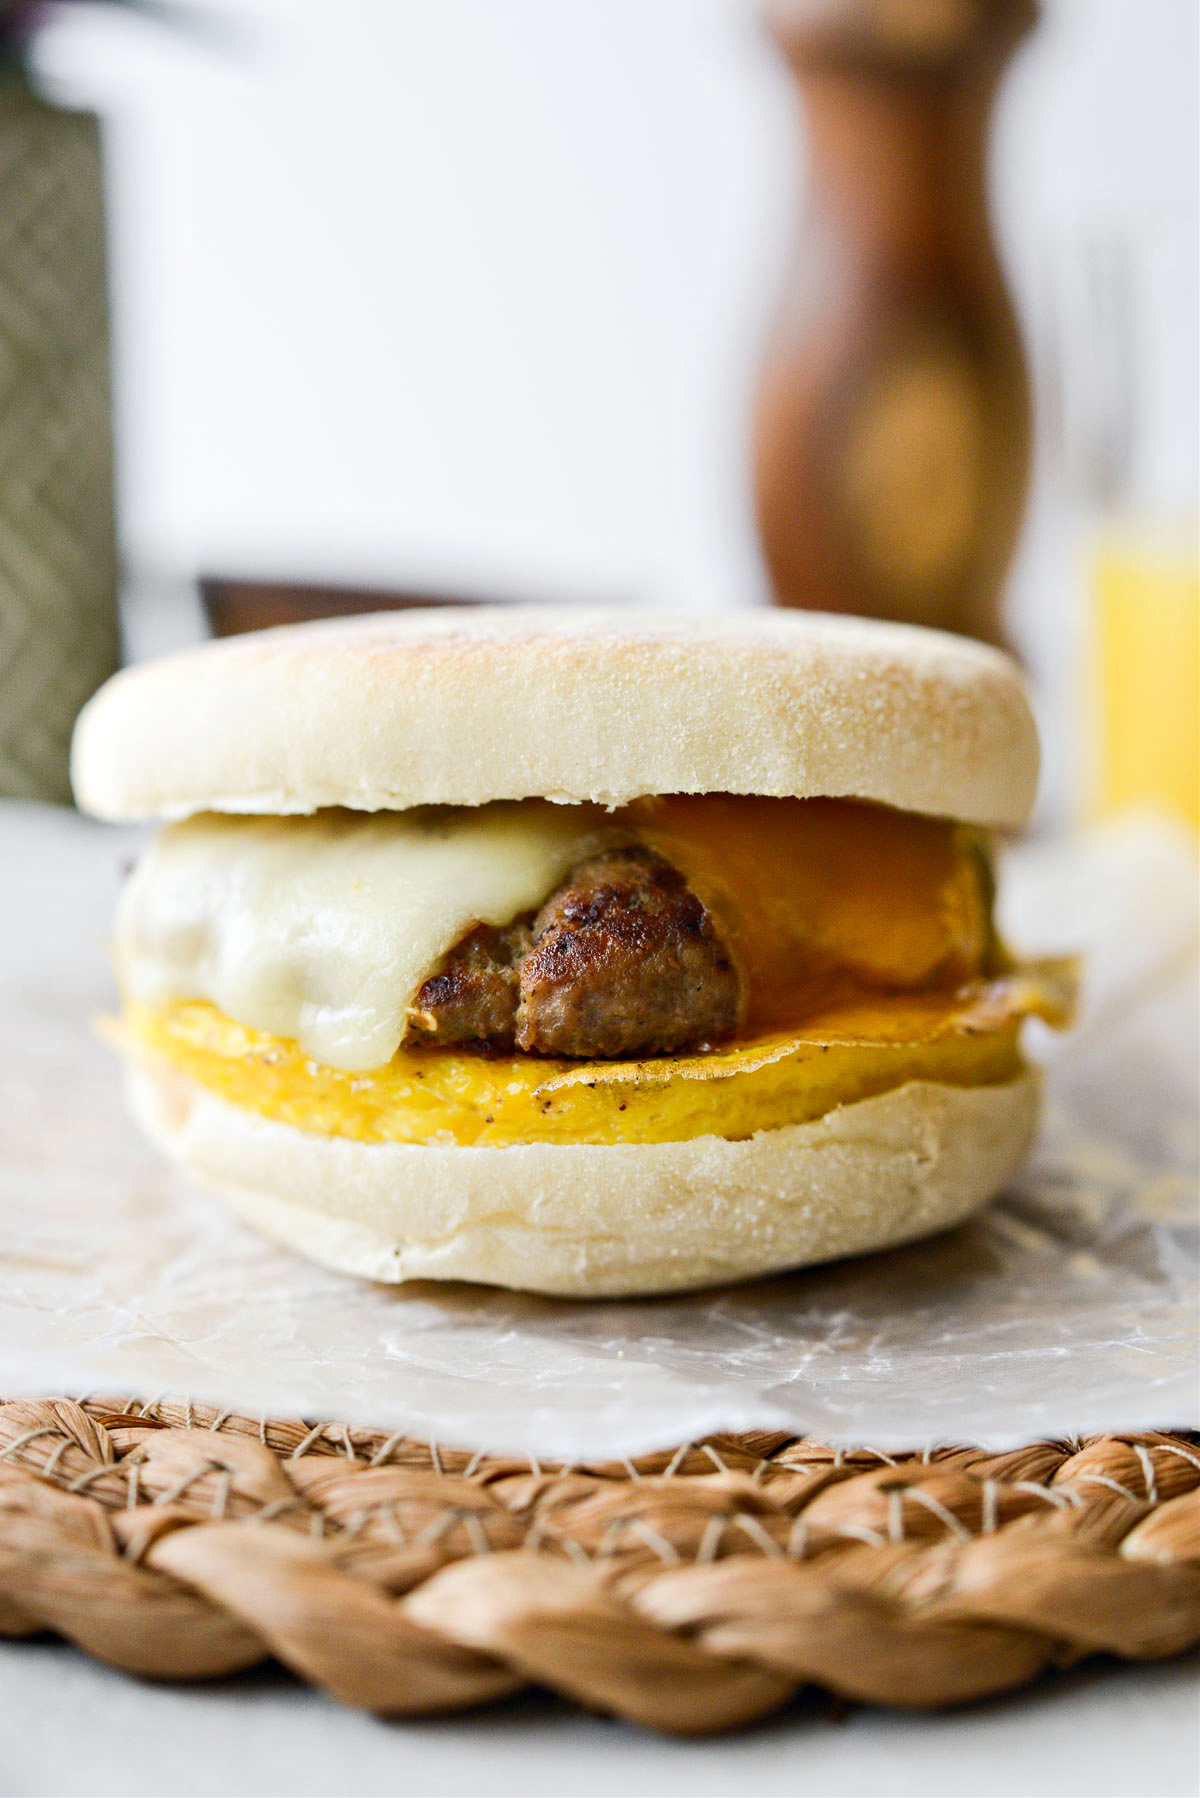 https://www.simplyscratch.com/wp-content/uploads/2023/03/Sausage-Egg-and-Cheese-Breakfast-Sandwich-l-SimplyScratch-21.jpg